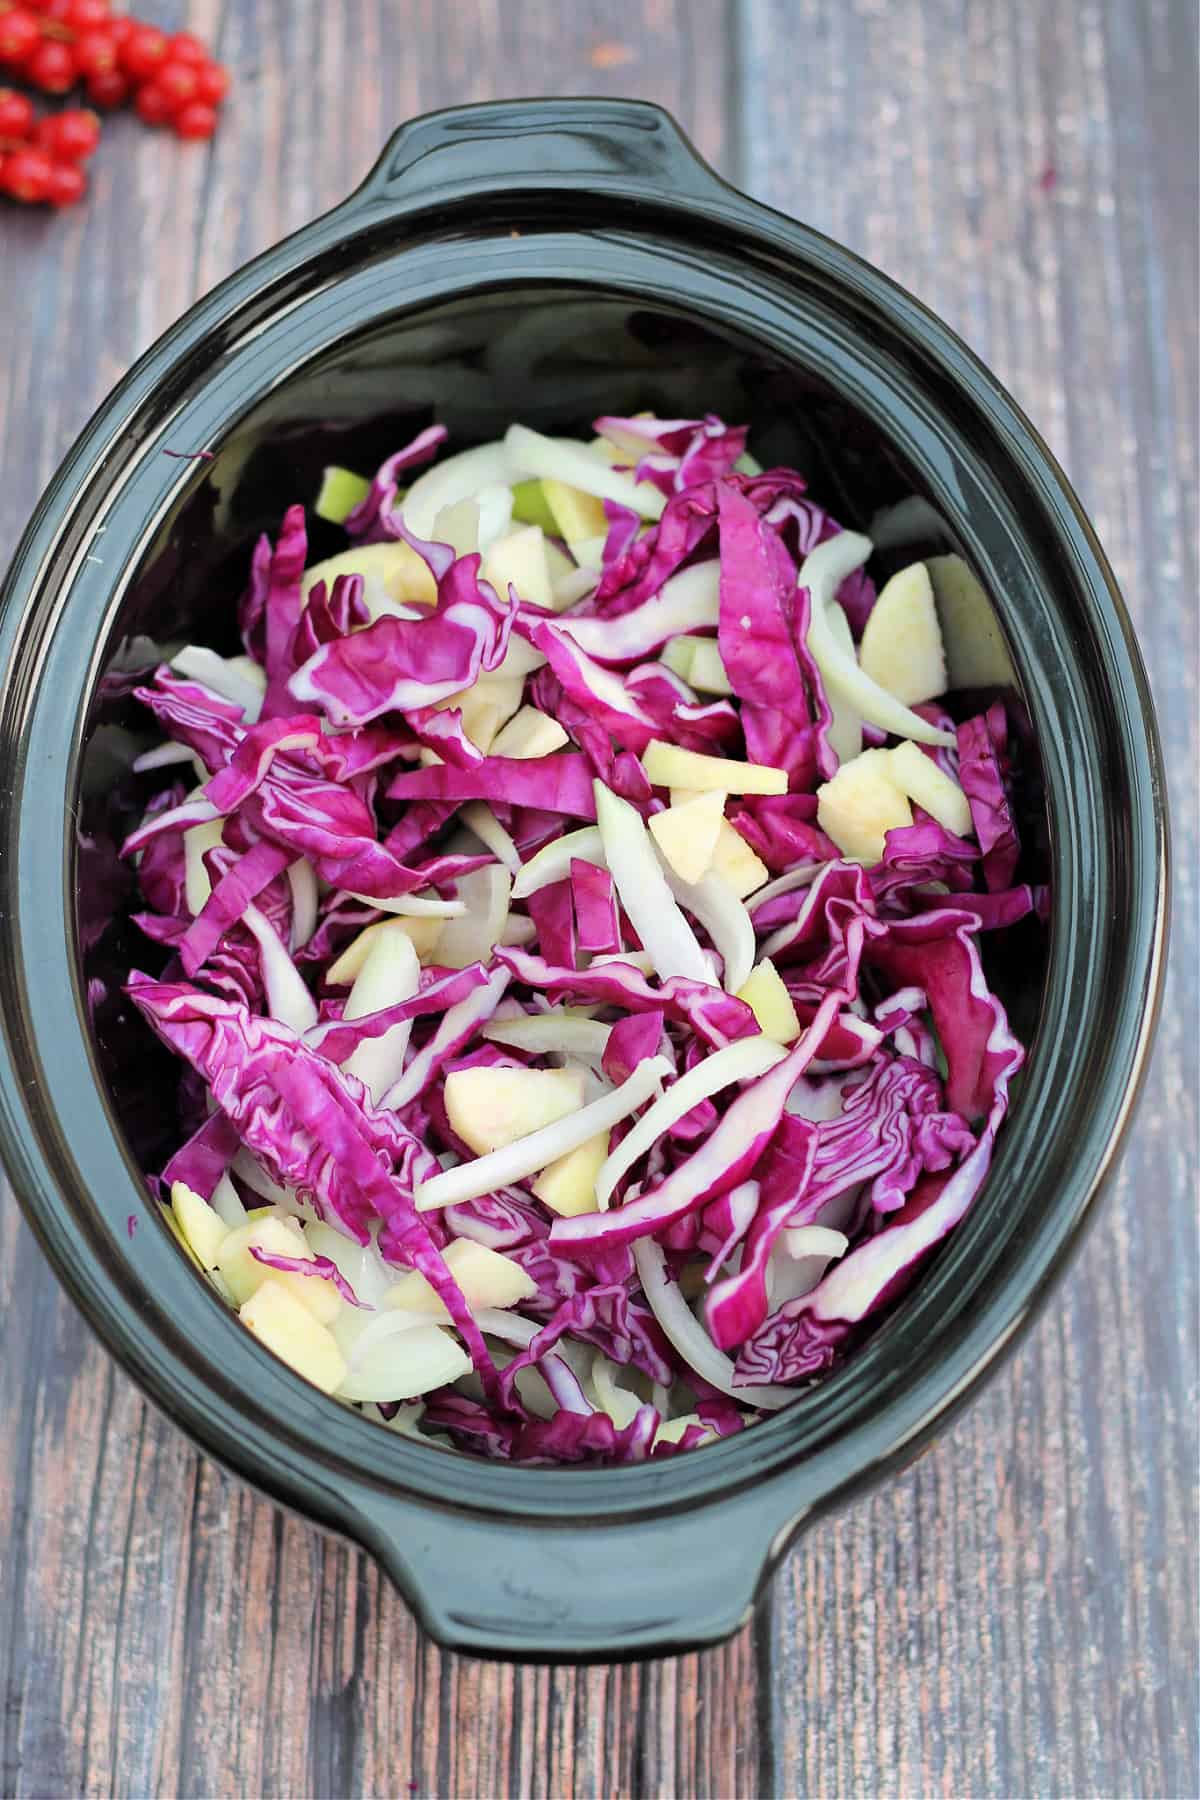 Slow cooker full of shredded cabbage, onion and apple.